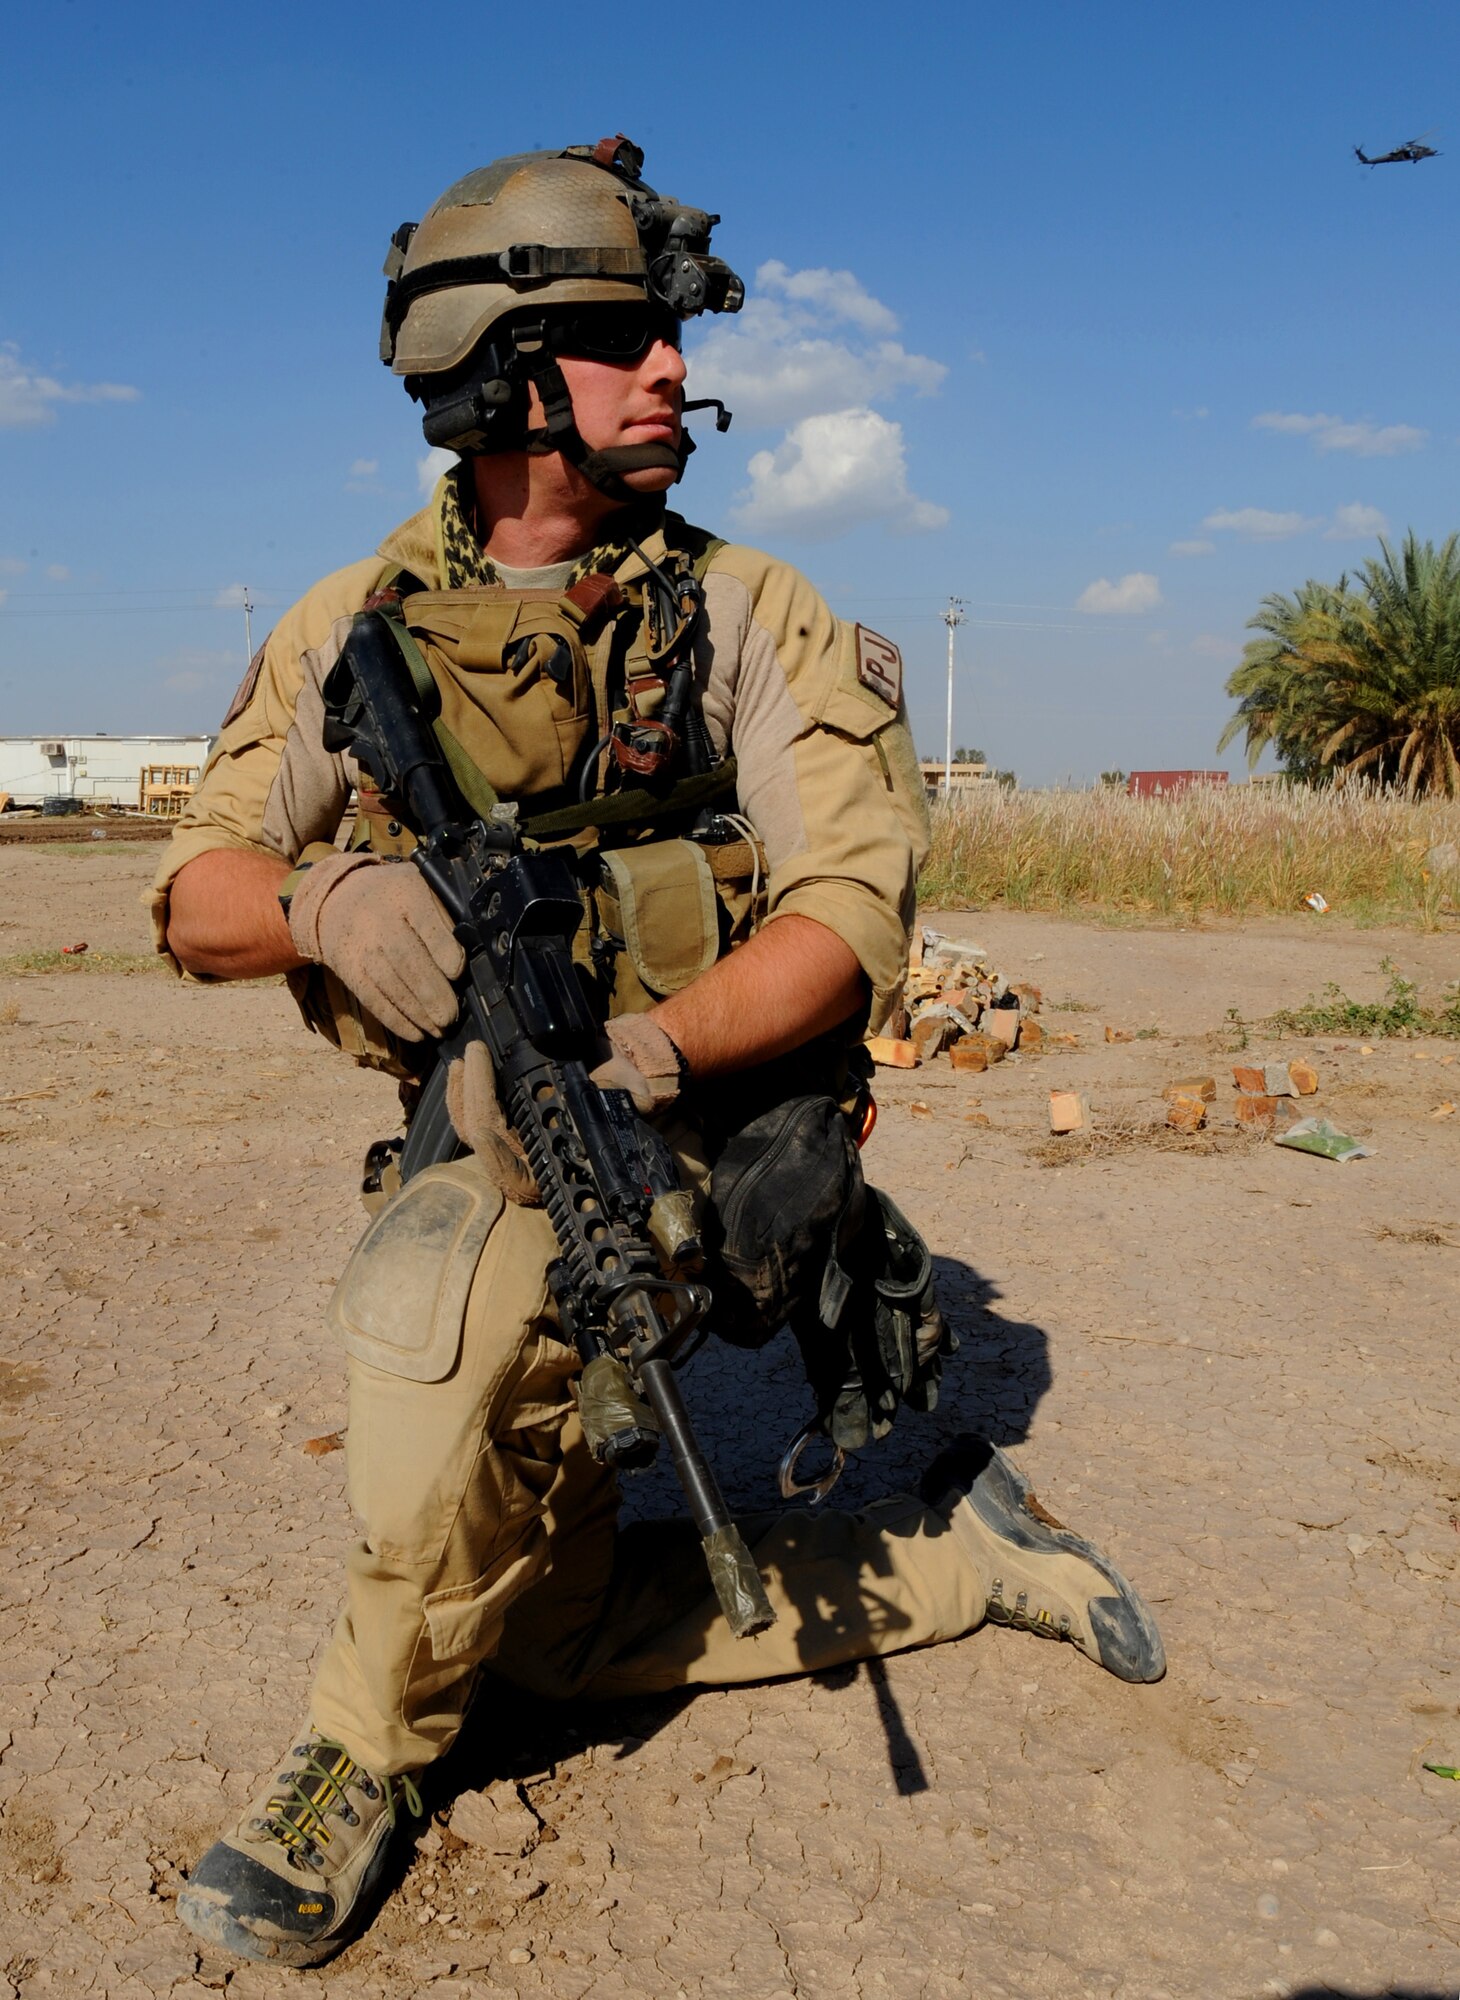 U.S. Air Force Pararescueman Senior Airman Matthew, from the 64th Expeditionary Rescue Squadron, Joint Base Balad, Iraq, conducts security for an HH-60 Pavehawk helicopter during proficiency training outside of Baghdad, Iraq, April 10, 2009, in support of Operation Iraqi Freedom.  (U.S. Air Force photo by Staff Sgt. James L. Harper Jr.)